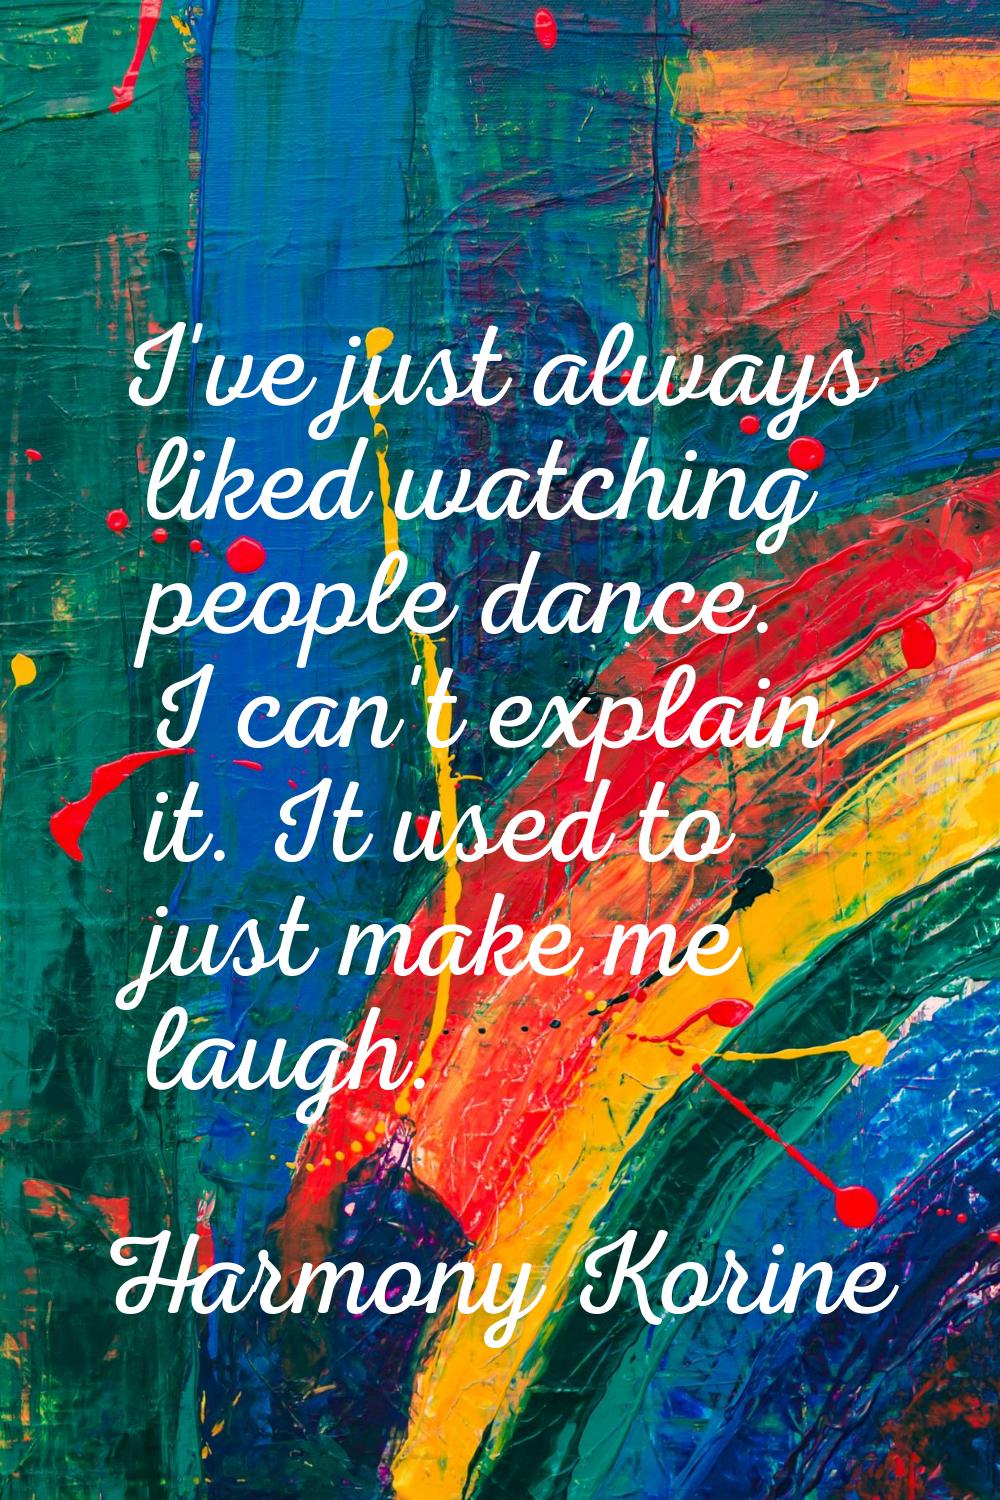 I've just always liked watching people dance. I can't explain it. It used to just make me laugh.